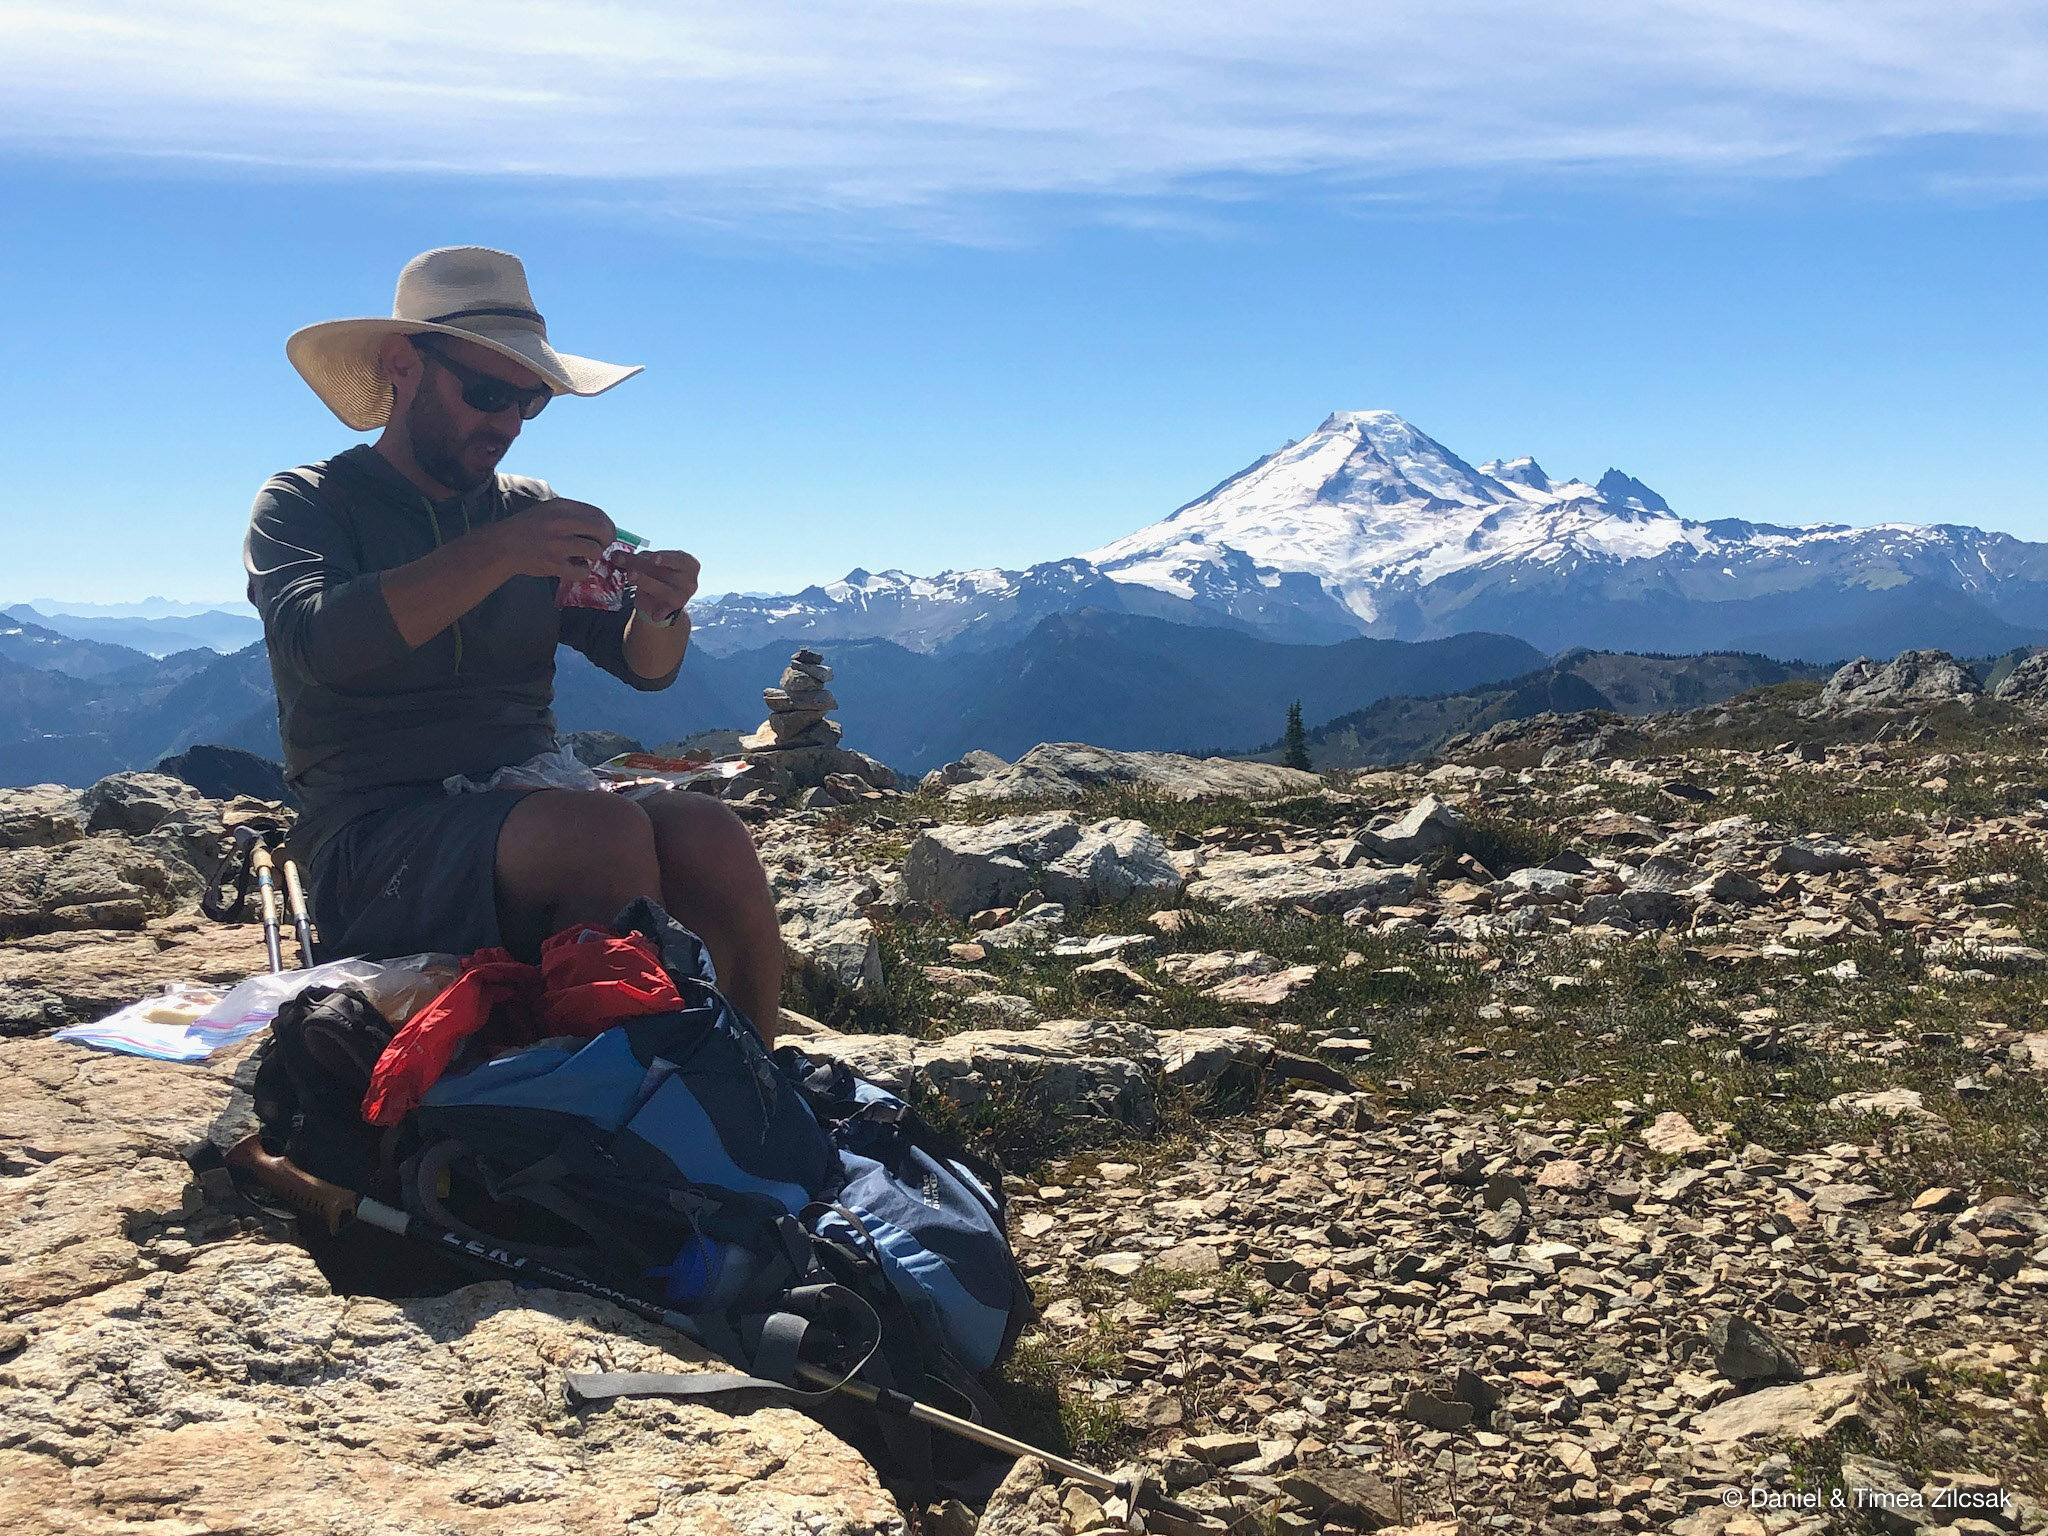 Lunch spot with Mount Baker in the background